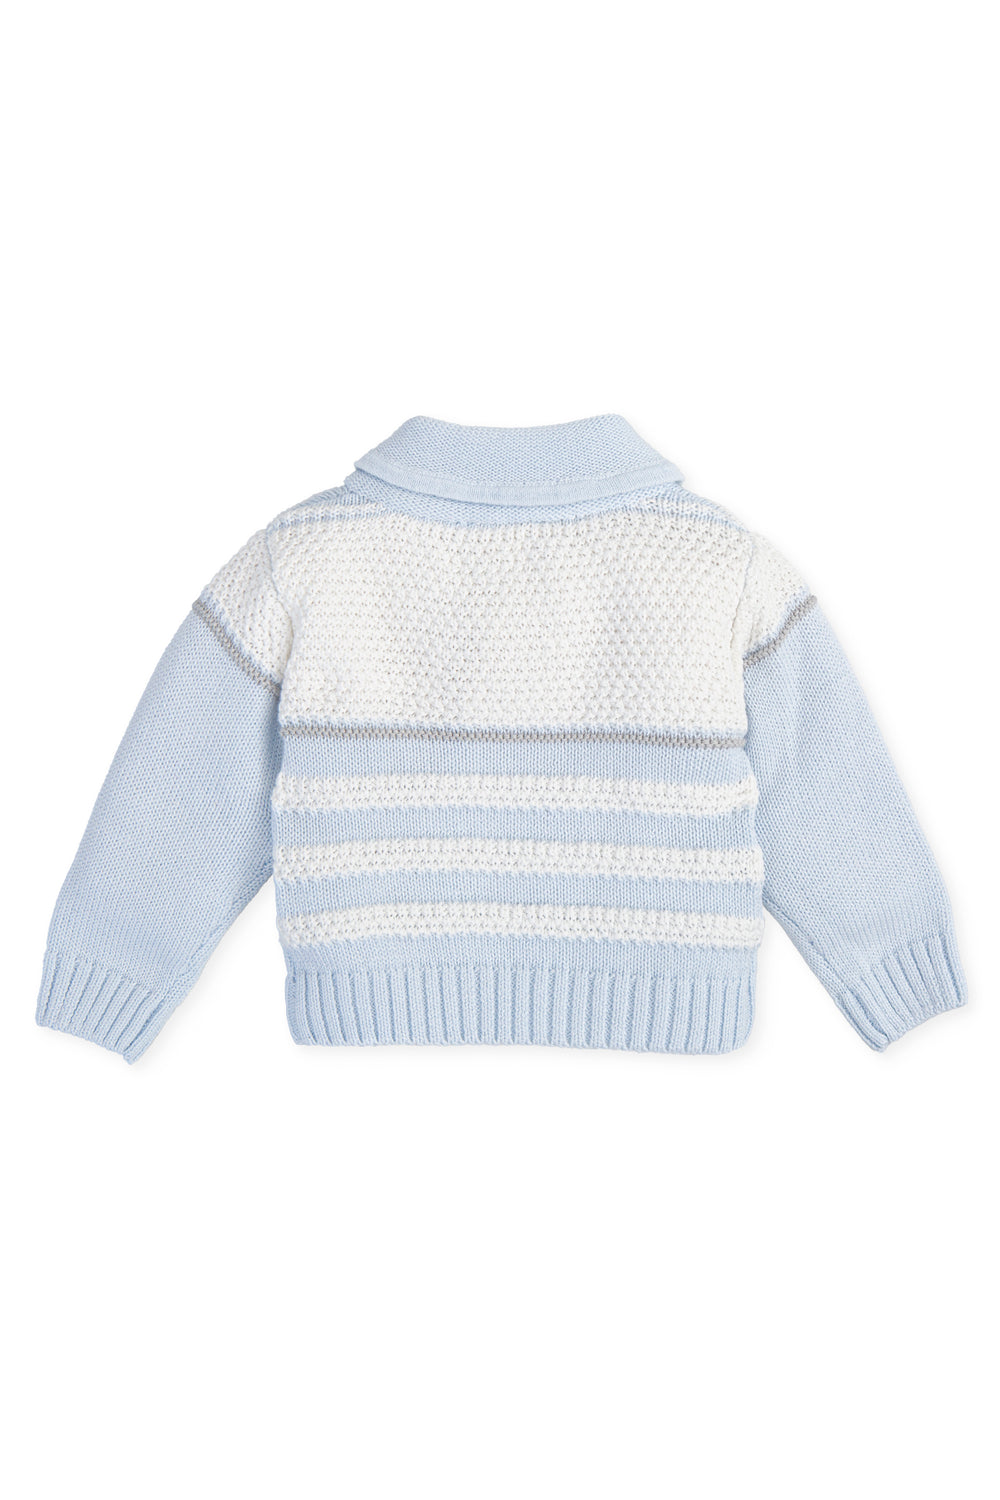 Tutto Piccolo "Alexander" Blue & White Striped Knit Jumper | iphoneandroidapplications